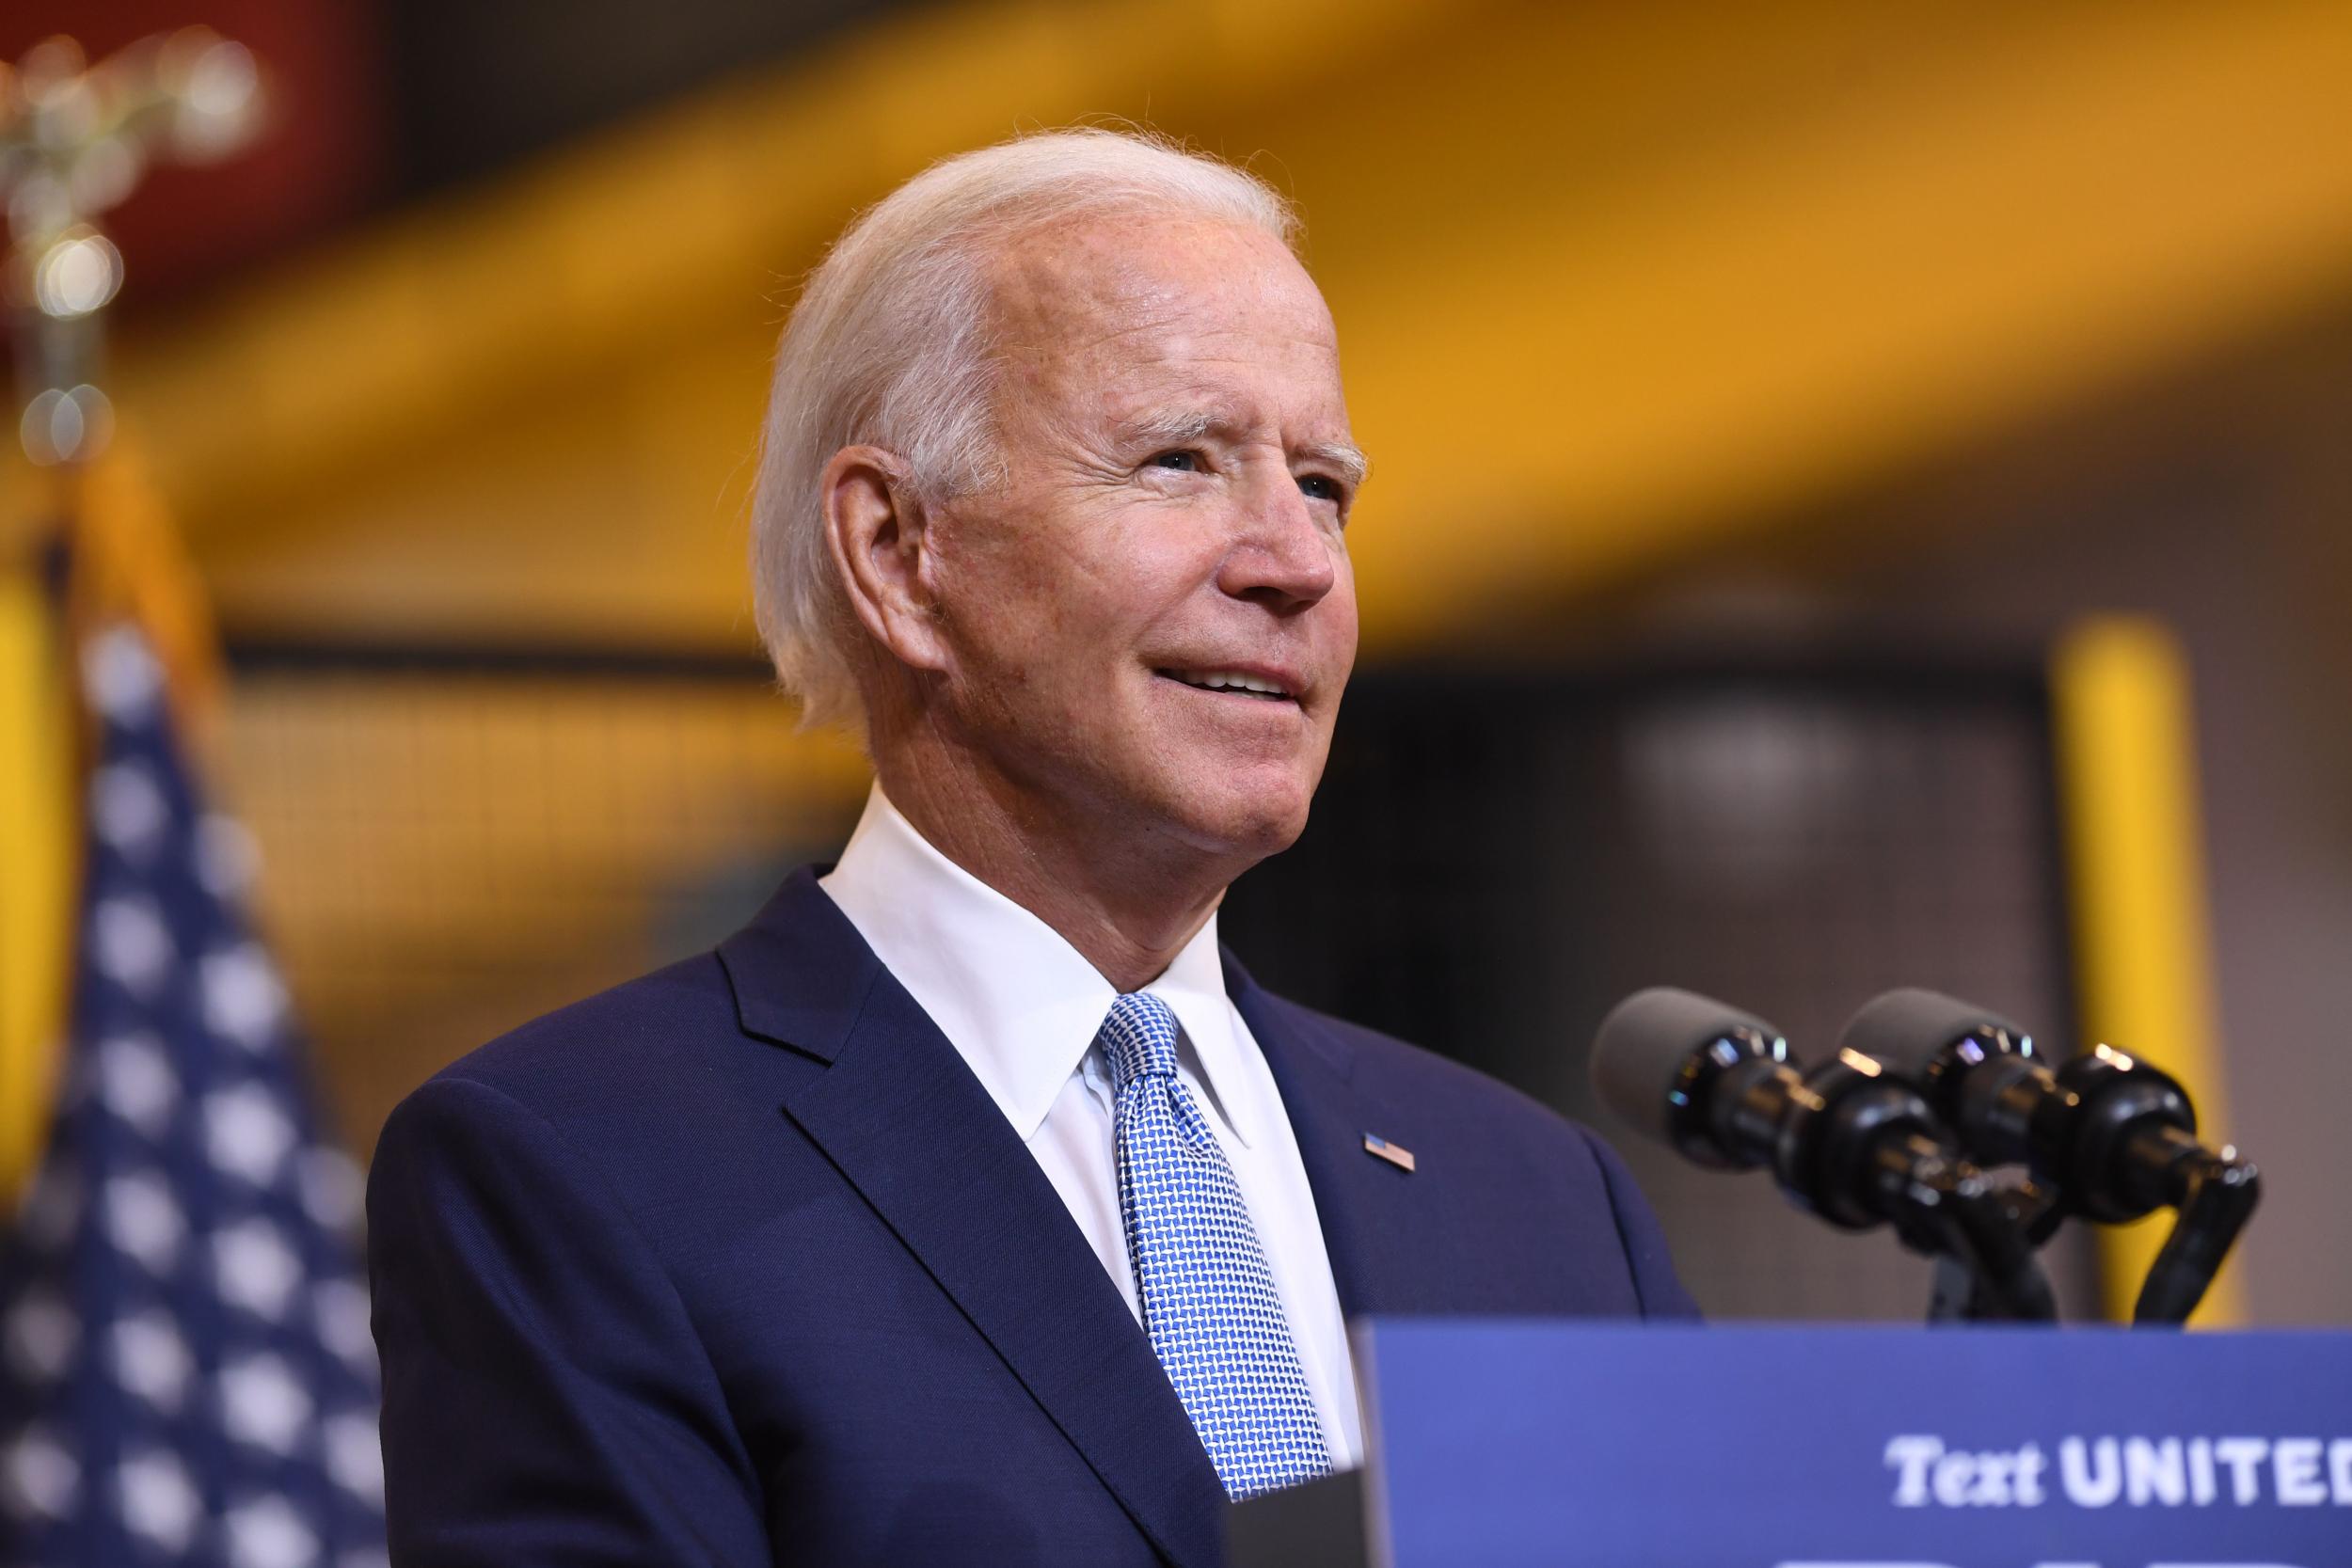 Democratic presidential nominee Joe Biden and President Donald Trump are scheduled to debate for the first time on 29 September in Cleveland, Ohio. (Photo courtesy Getty Images)